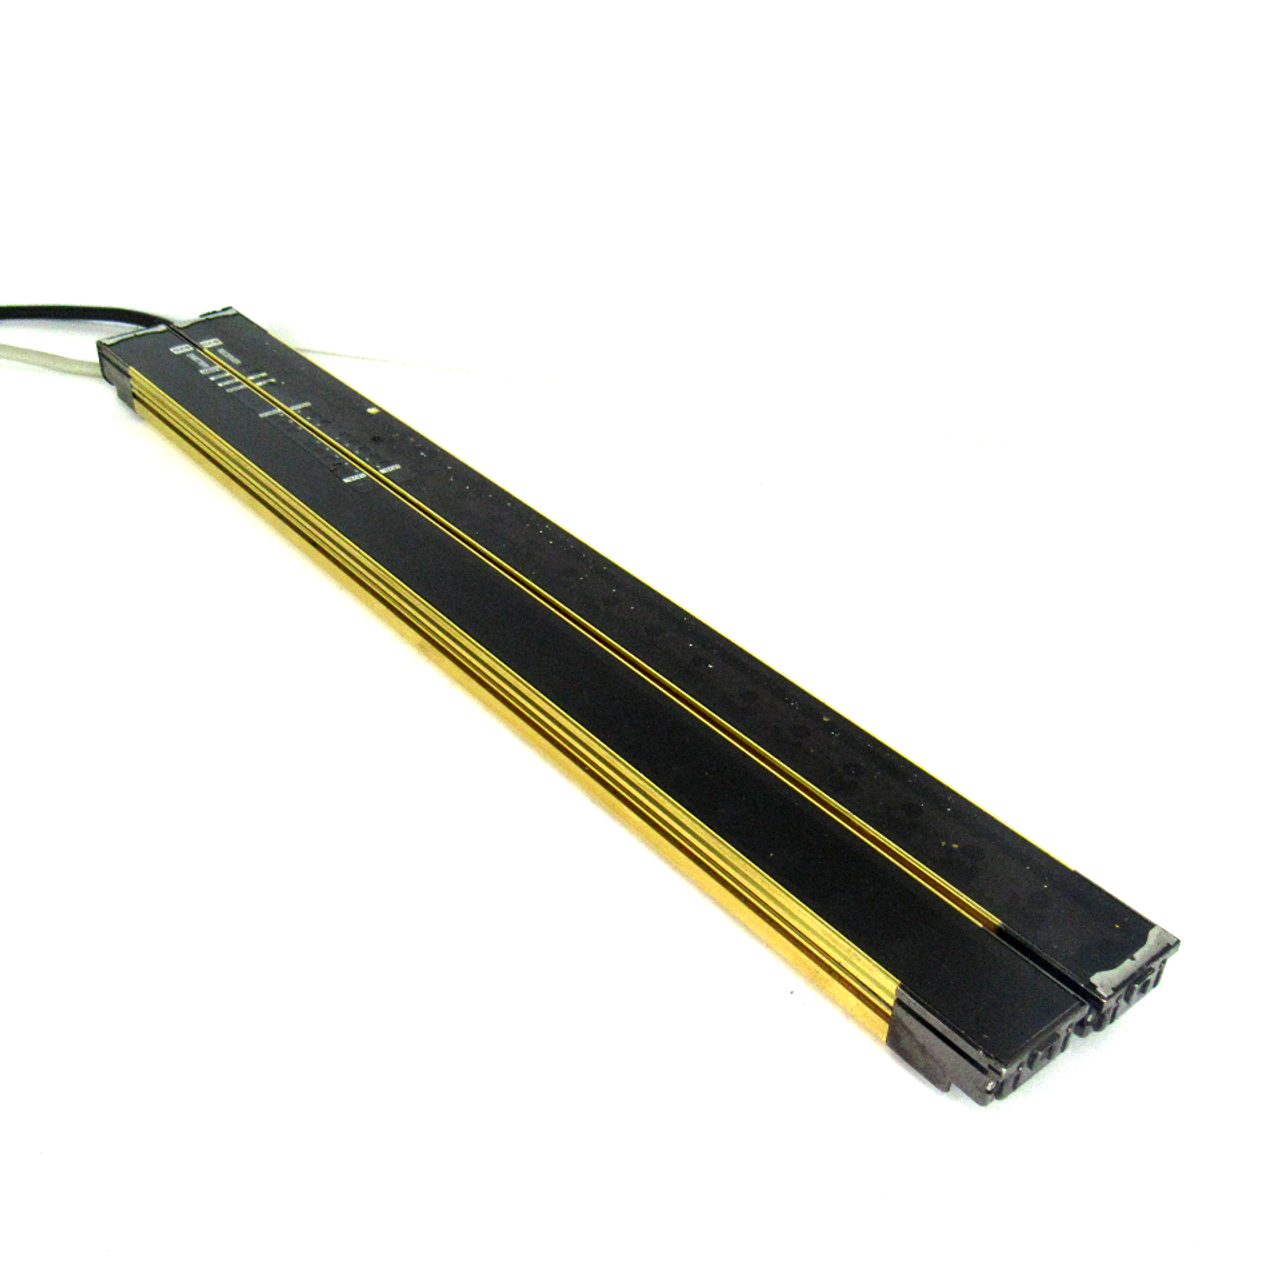 Omron F3SJ-A0460P25 Safety Light Curtain